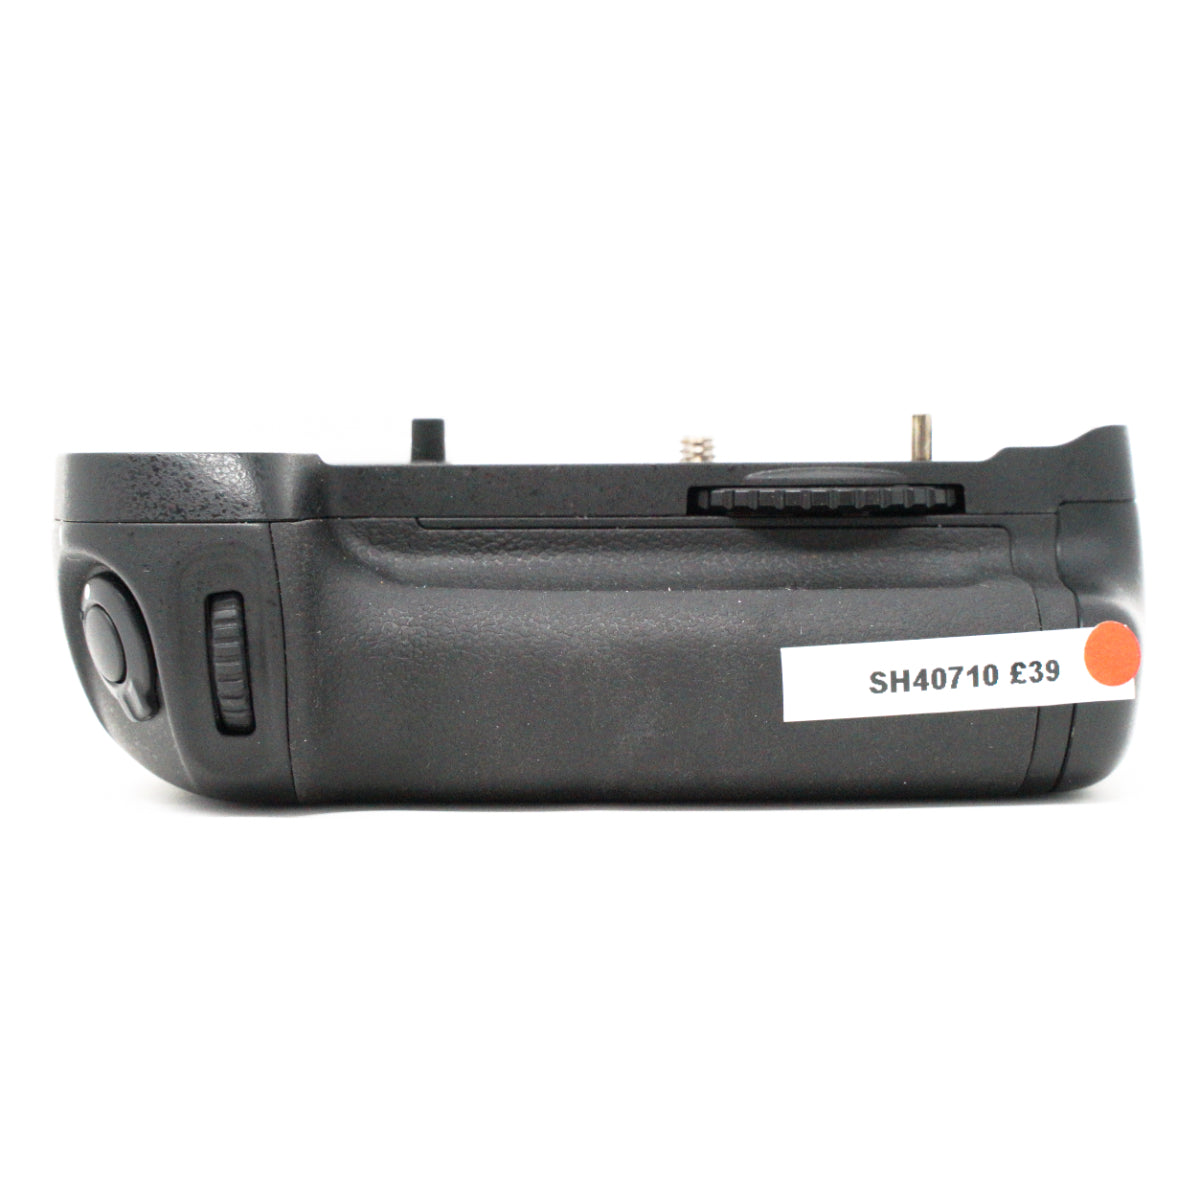 Used Nikon MB-D14 battery grip For D600/D610